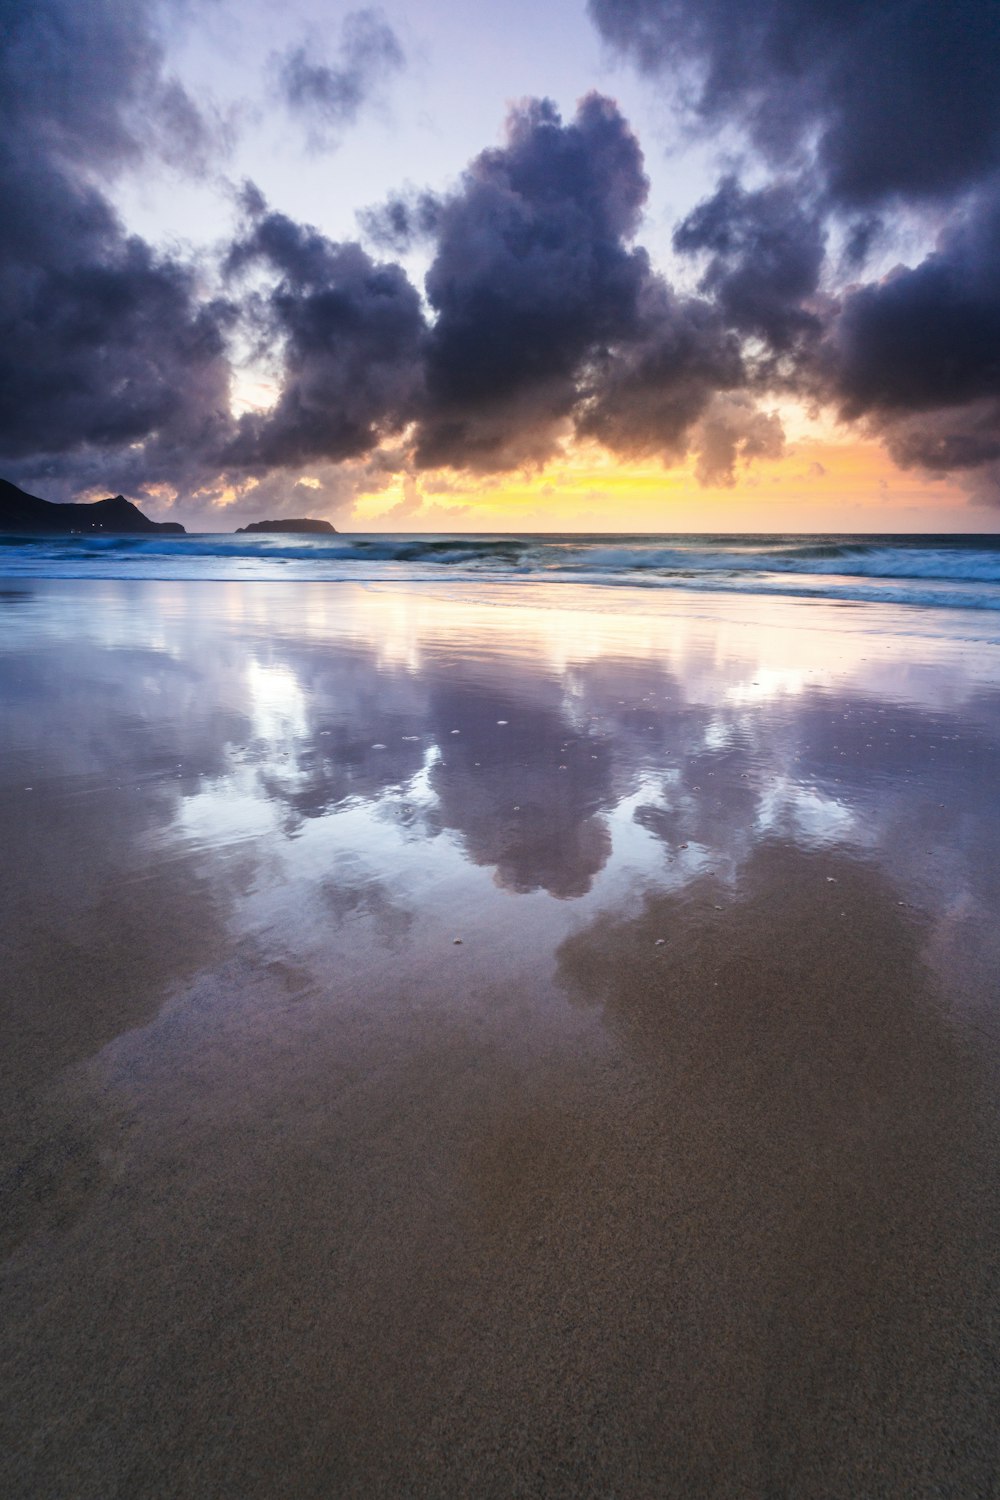 a view of a beach at sunset with clouds in the sky